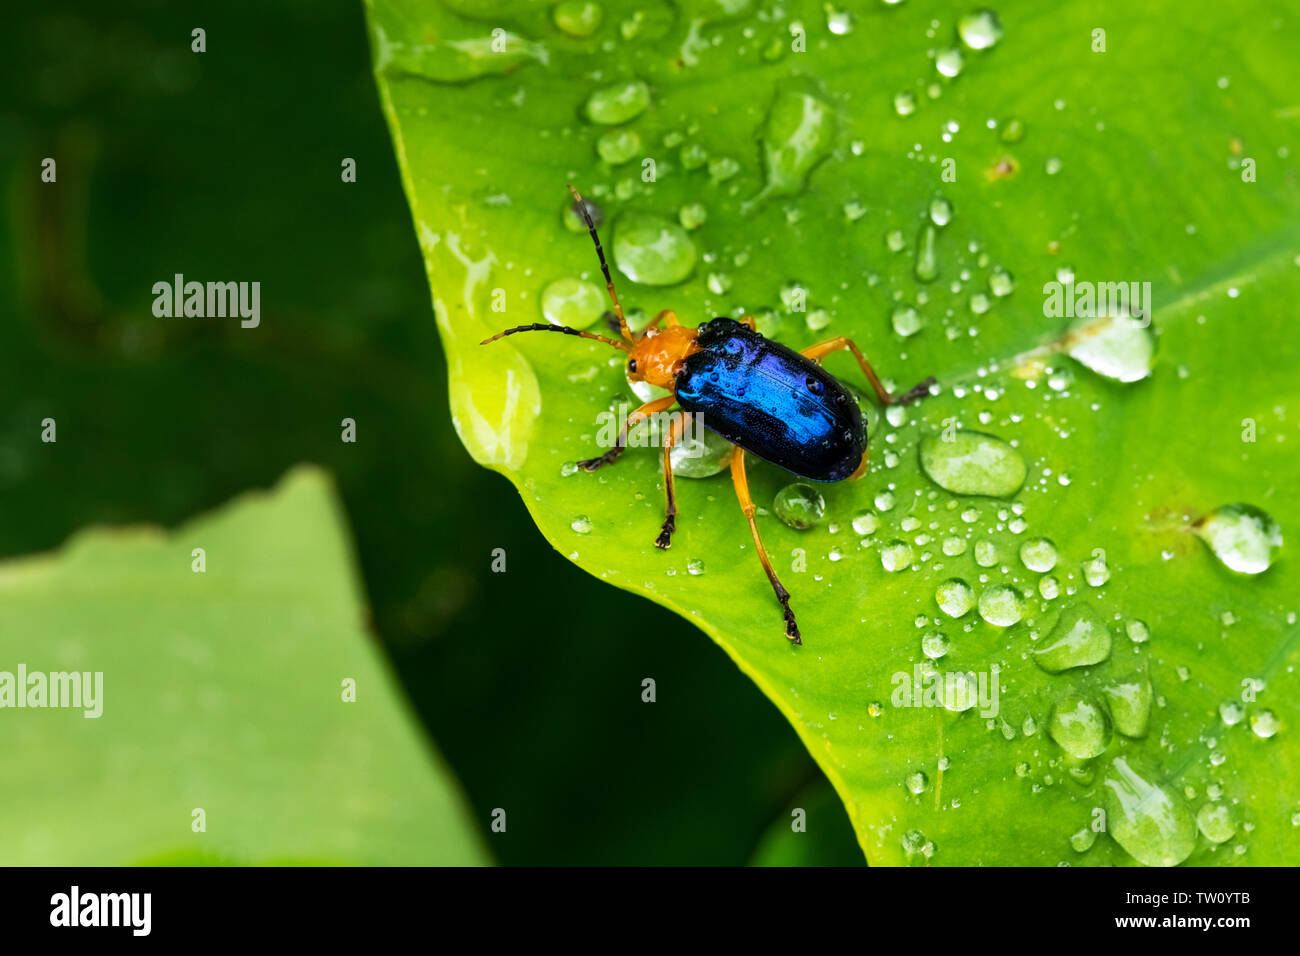 Beetles on a leaf Calomela is a genus of beetles commonly called leaf beetles and in the family Chrysomelidae. Pokhara Nepal Stock Photo